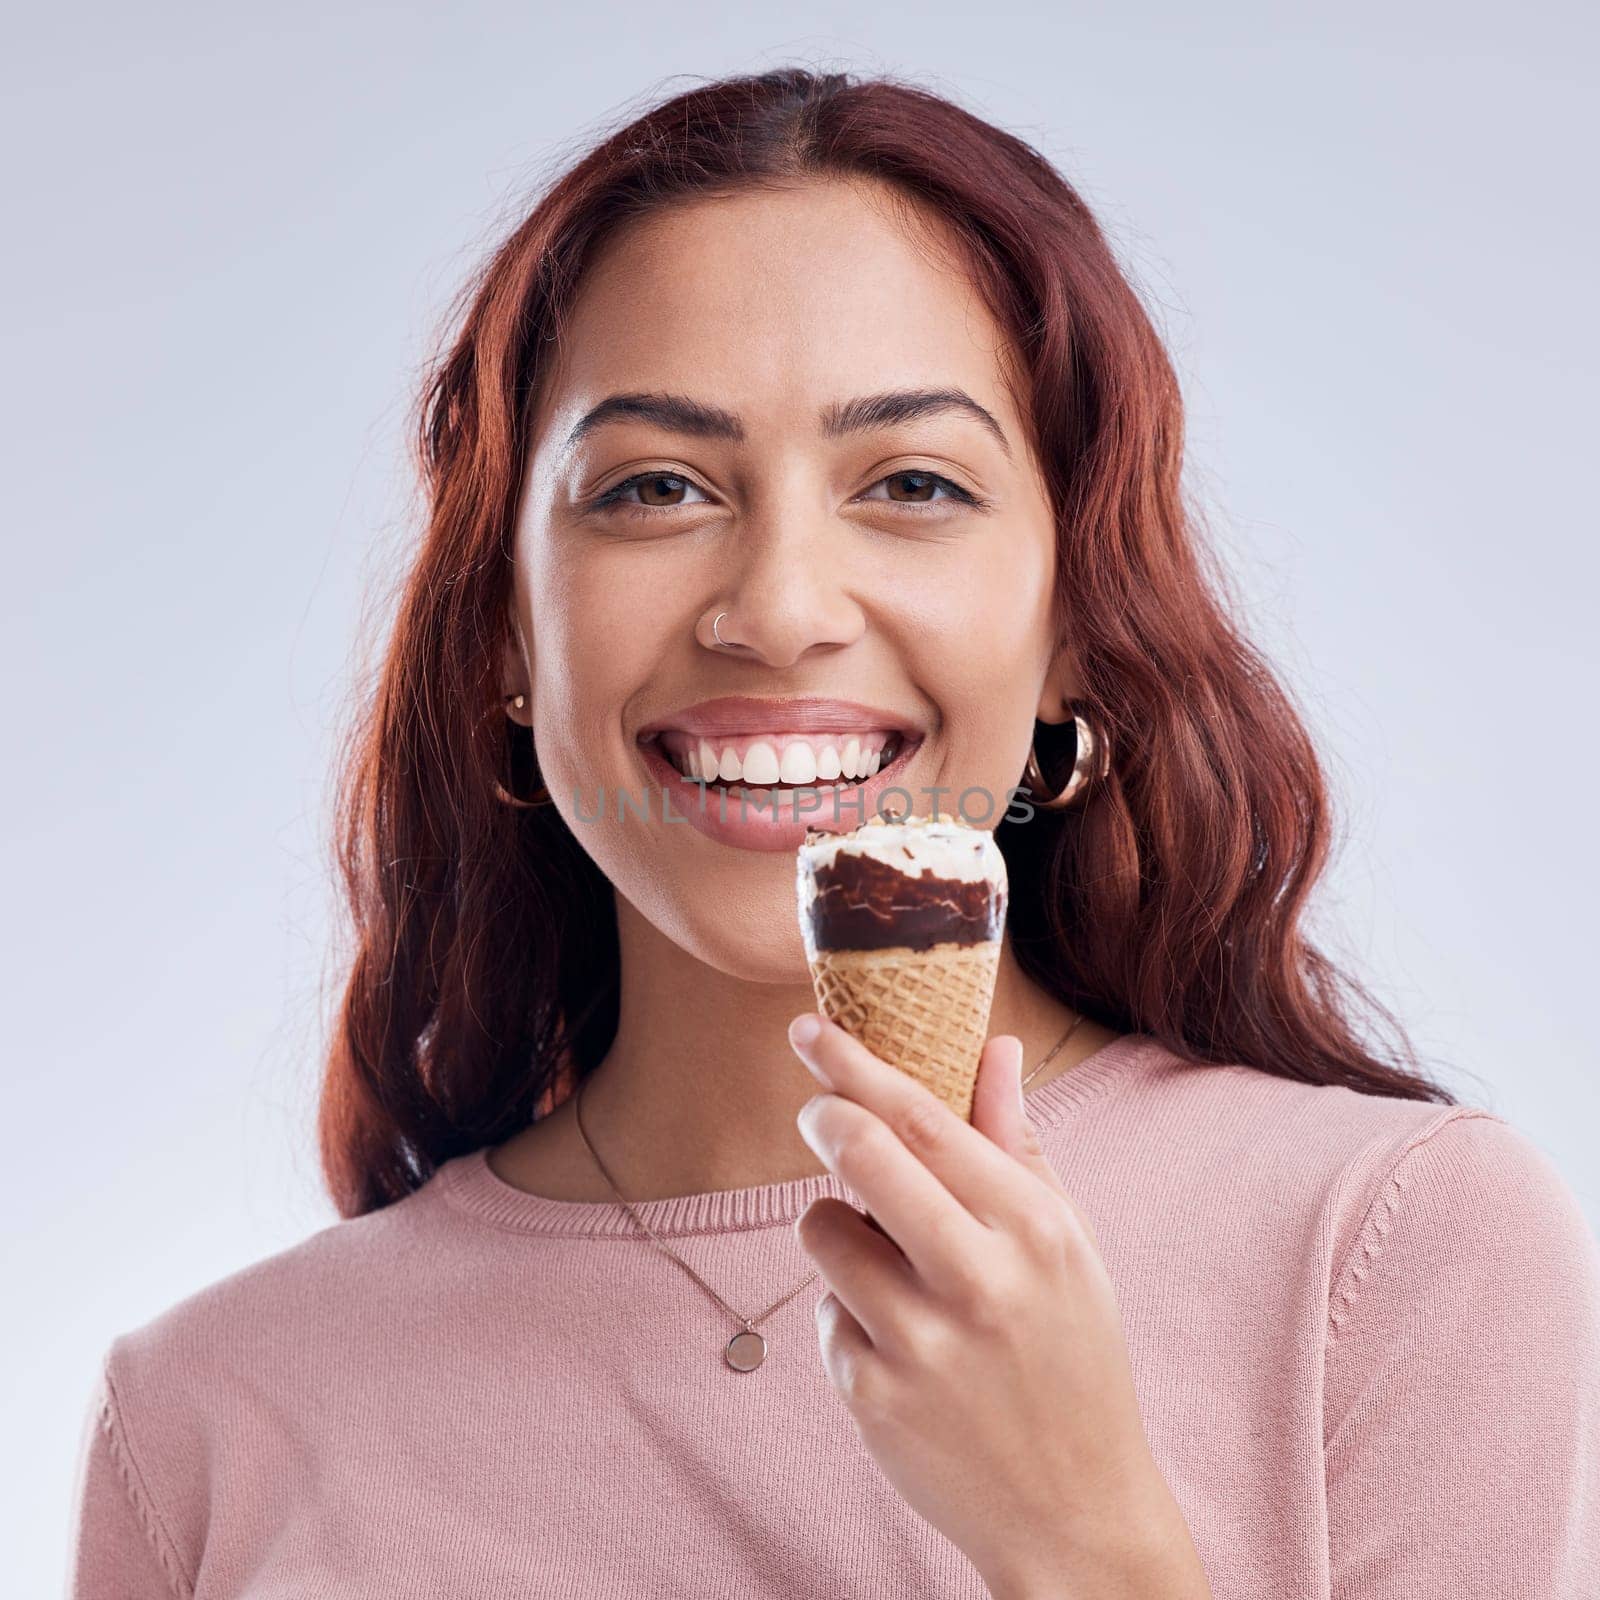 Happy, ice cream and portrait of woman with smile in studio with dessert, snack and sweet treats. Food, style and face of female person with cone for eating, luxury and summer on gray background.